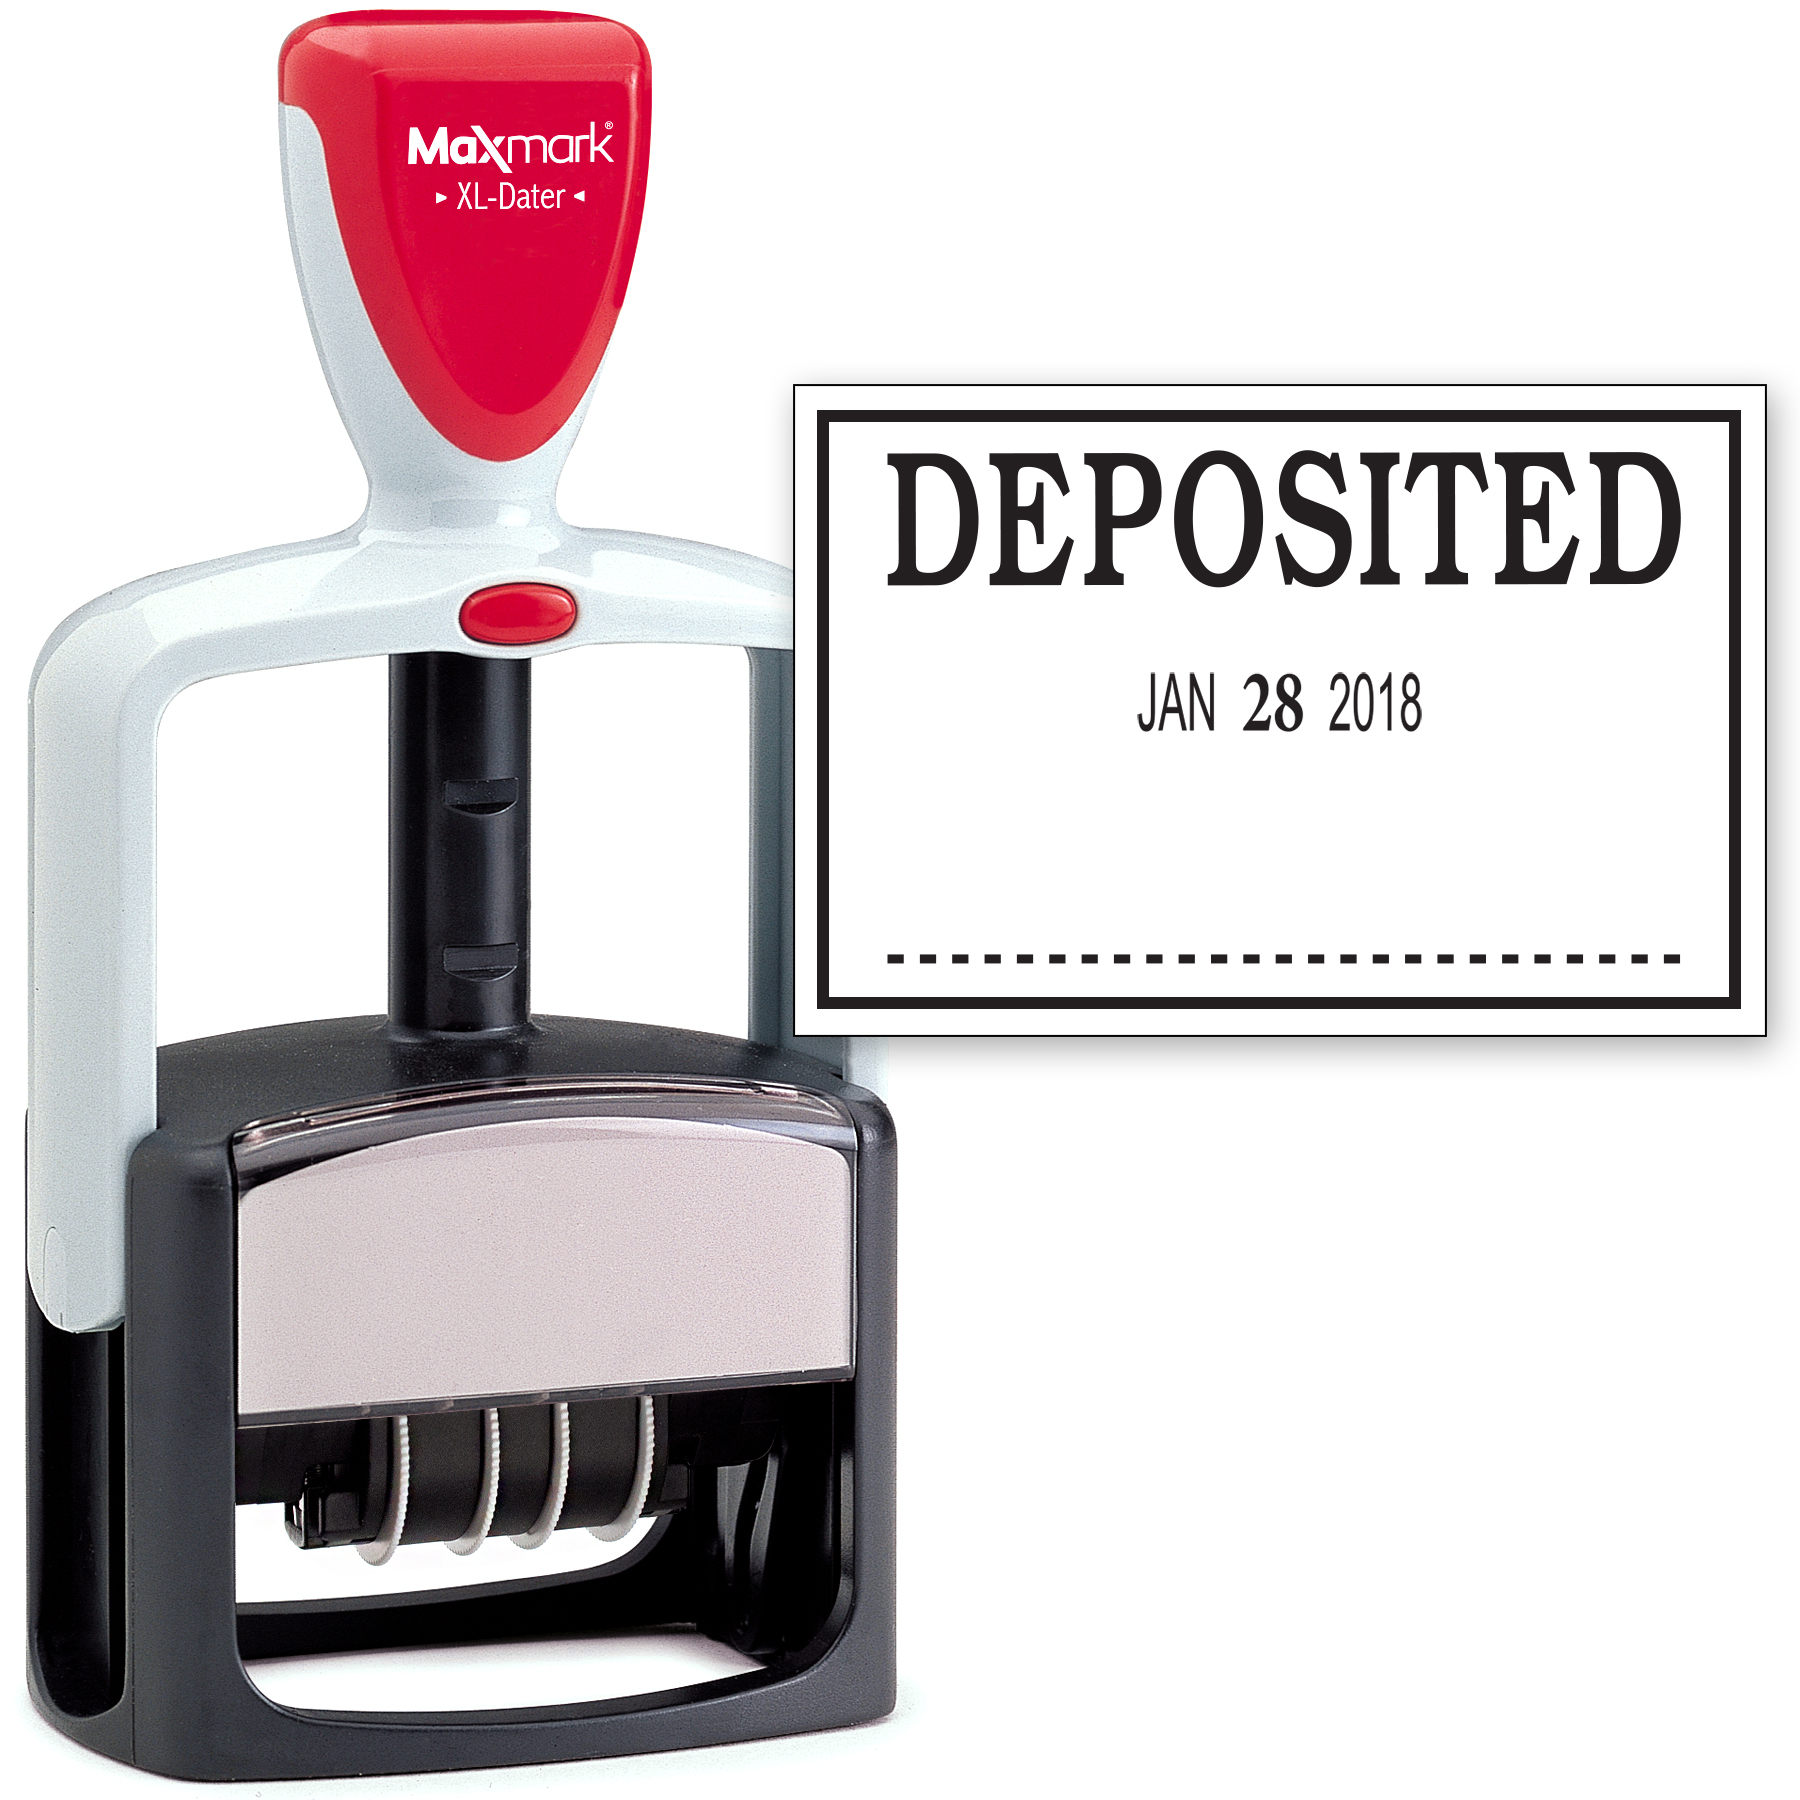 2000 PLUS Heavy Duty Style 2-Color Date Stamp with DEPOSITED self inking stamp - Black Ink